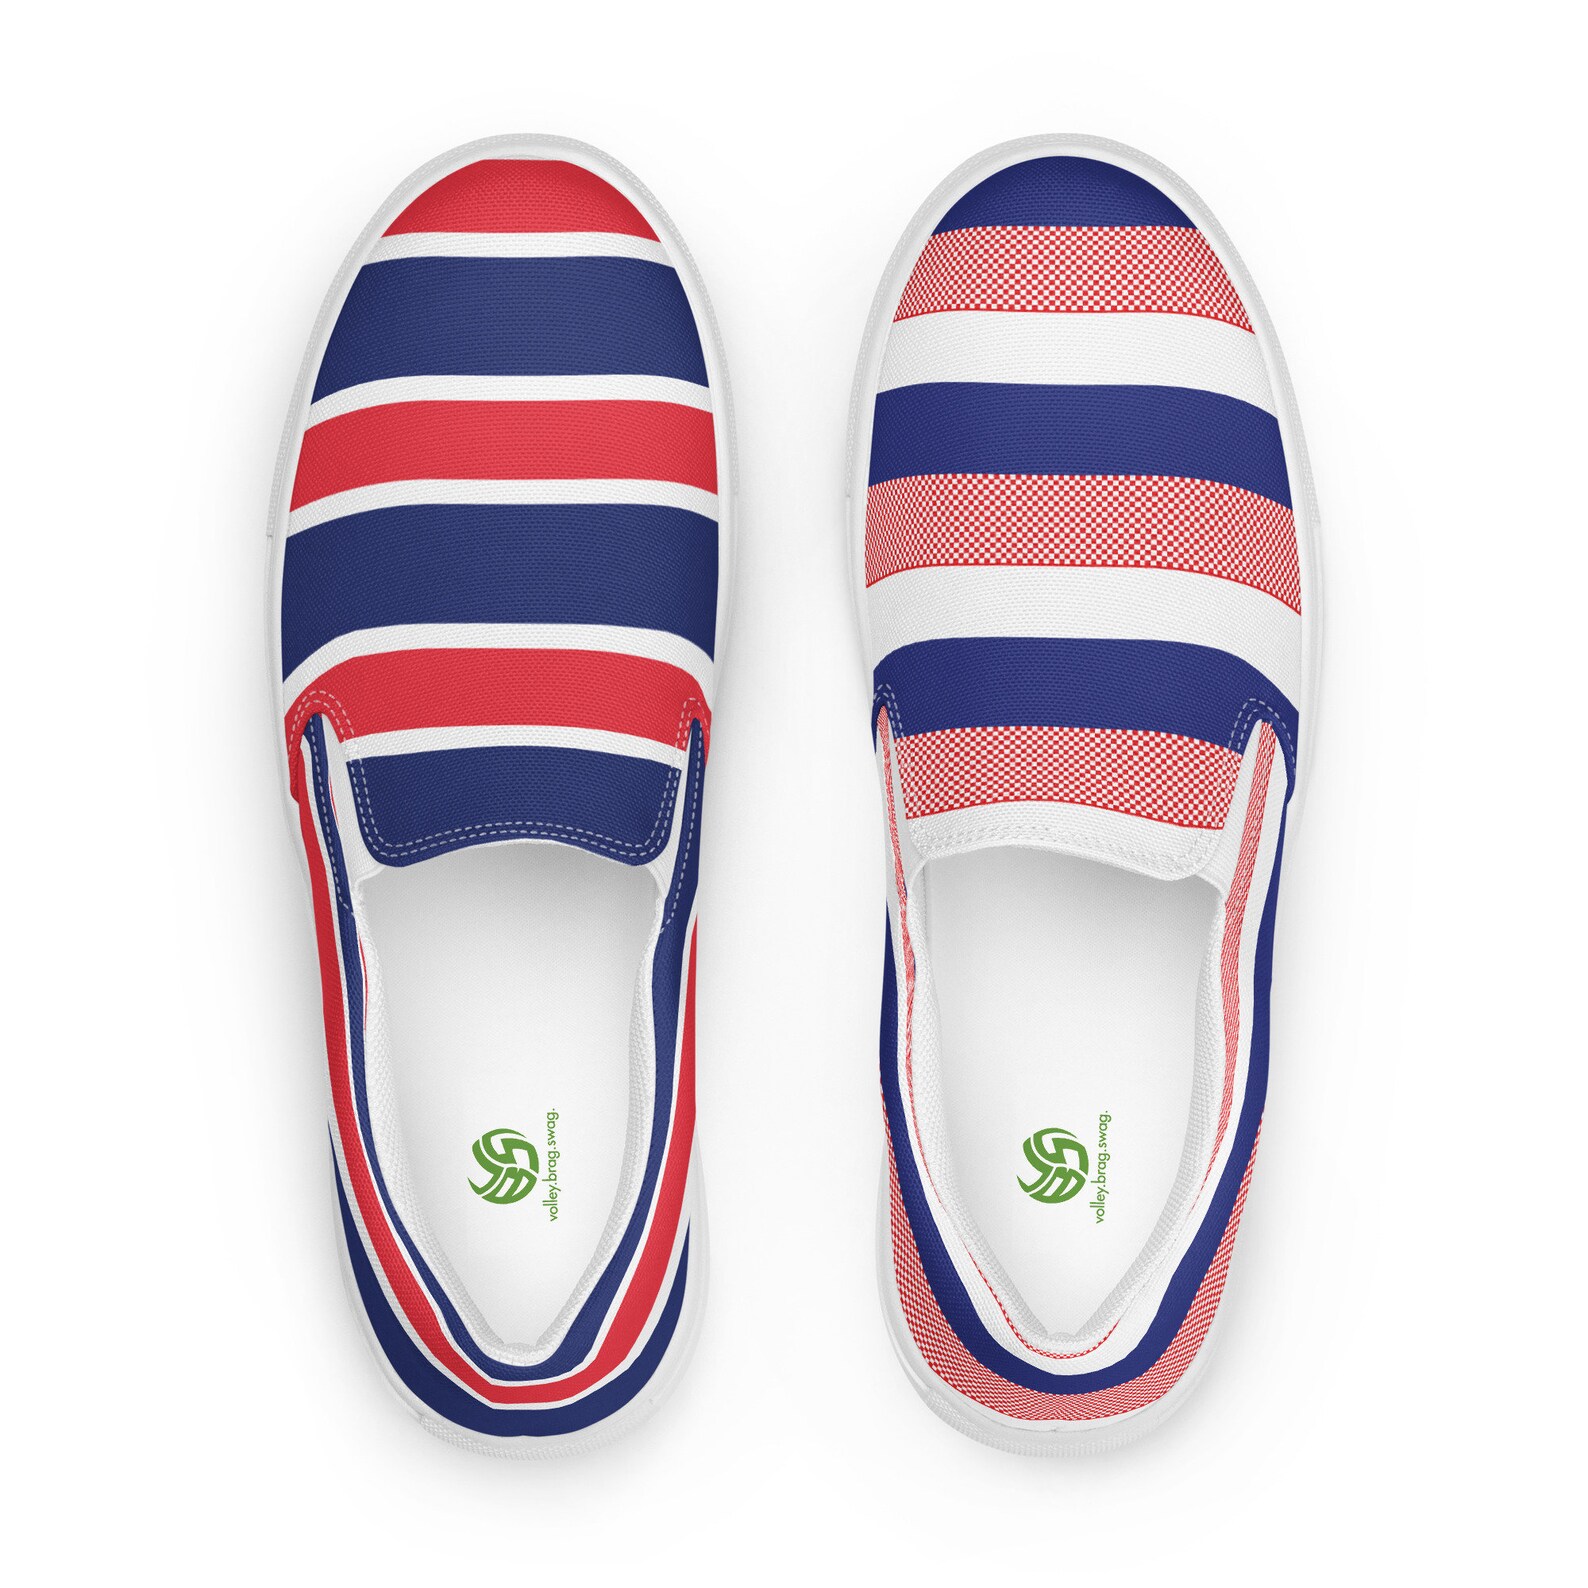 I styled my line of women canvas slip on shoes with unexpectedly cool patterns and unpredictable volleyball slogans and logos so volleyball players had options.